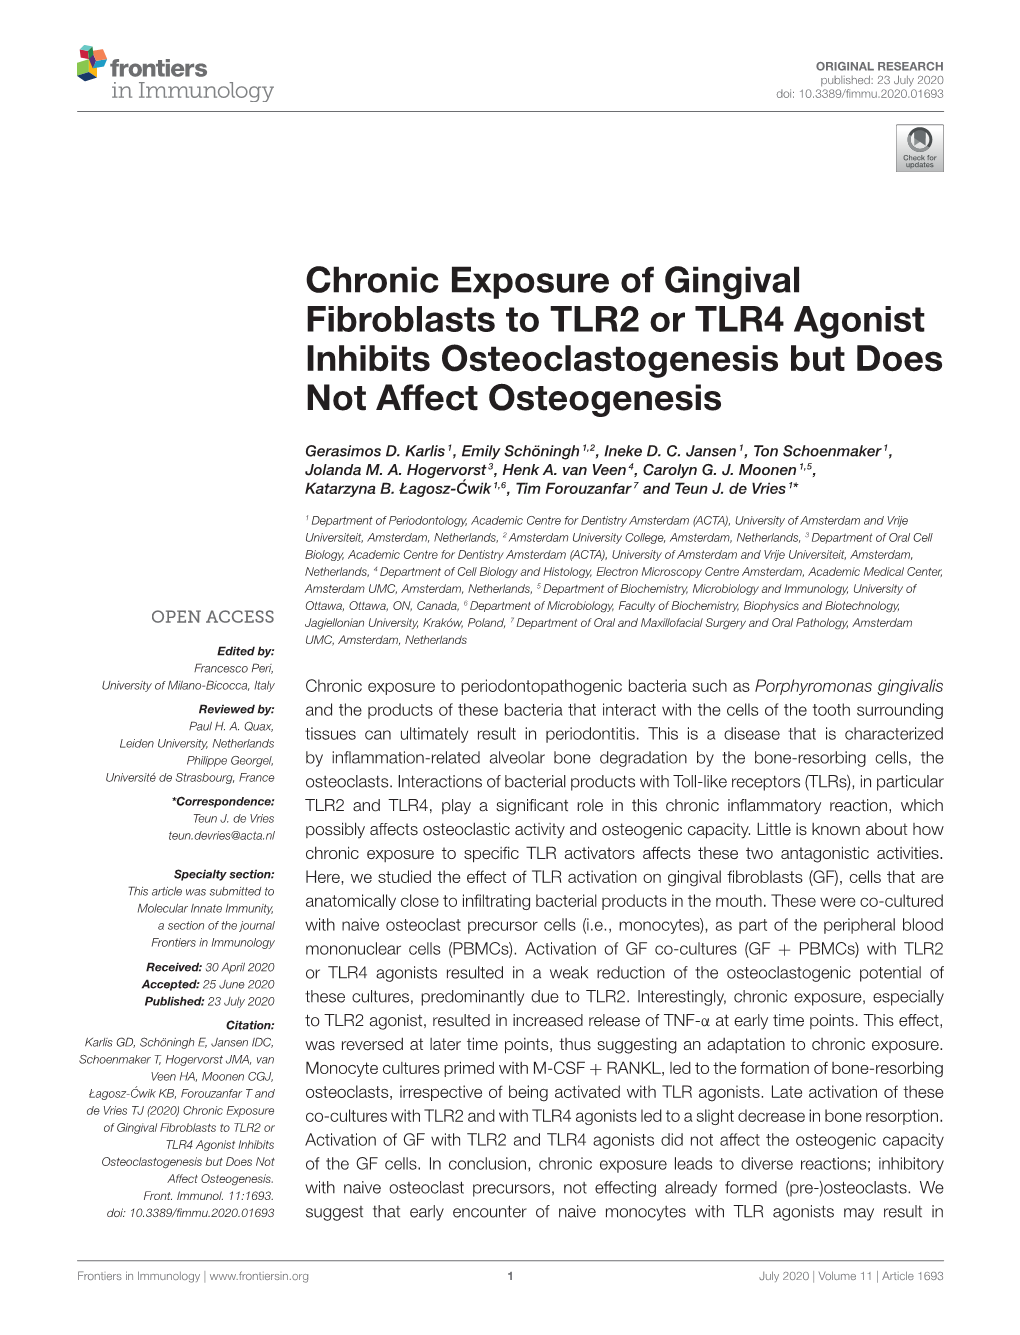 Chronic Exposure of Gingival Fibroblasts to TLR2 Or TLR4 Agonist Inhibits Osteoclastogenesis but Does Not Affect Osteogenesis